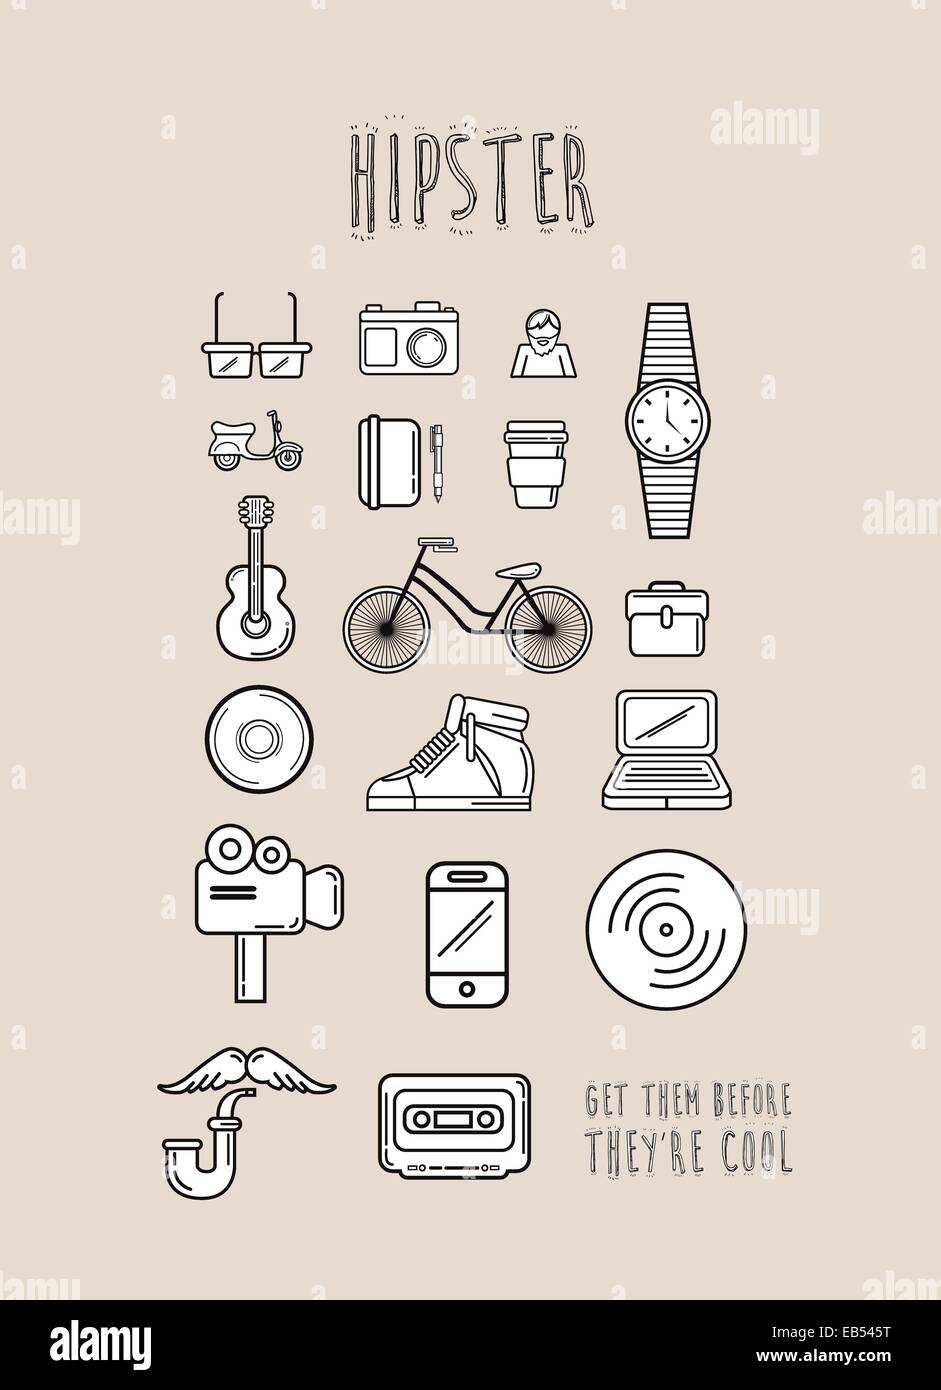 Hipster icons in simple design Stock Vector